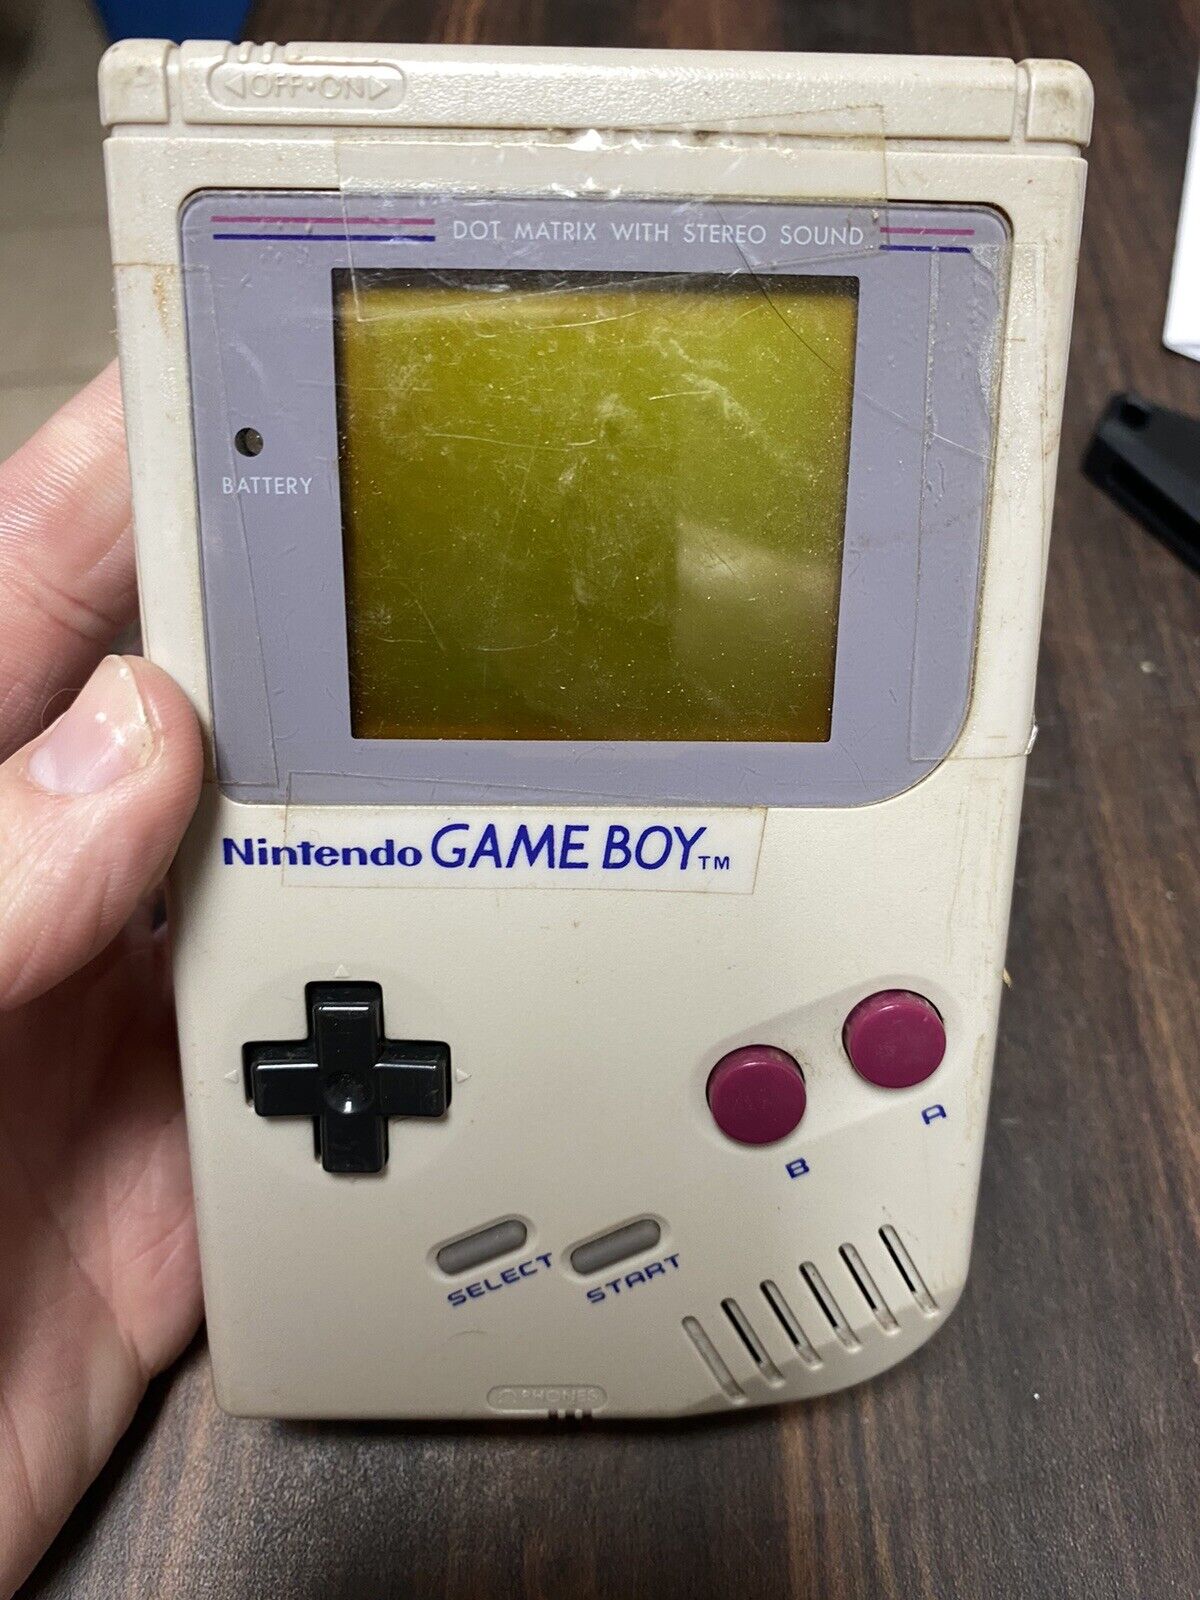 Original Nintendo GameBoy Handheld Console SOLD AS IS-FOR PARTS  NO POWER